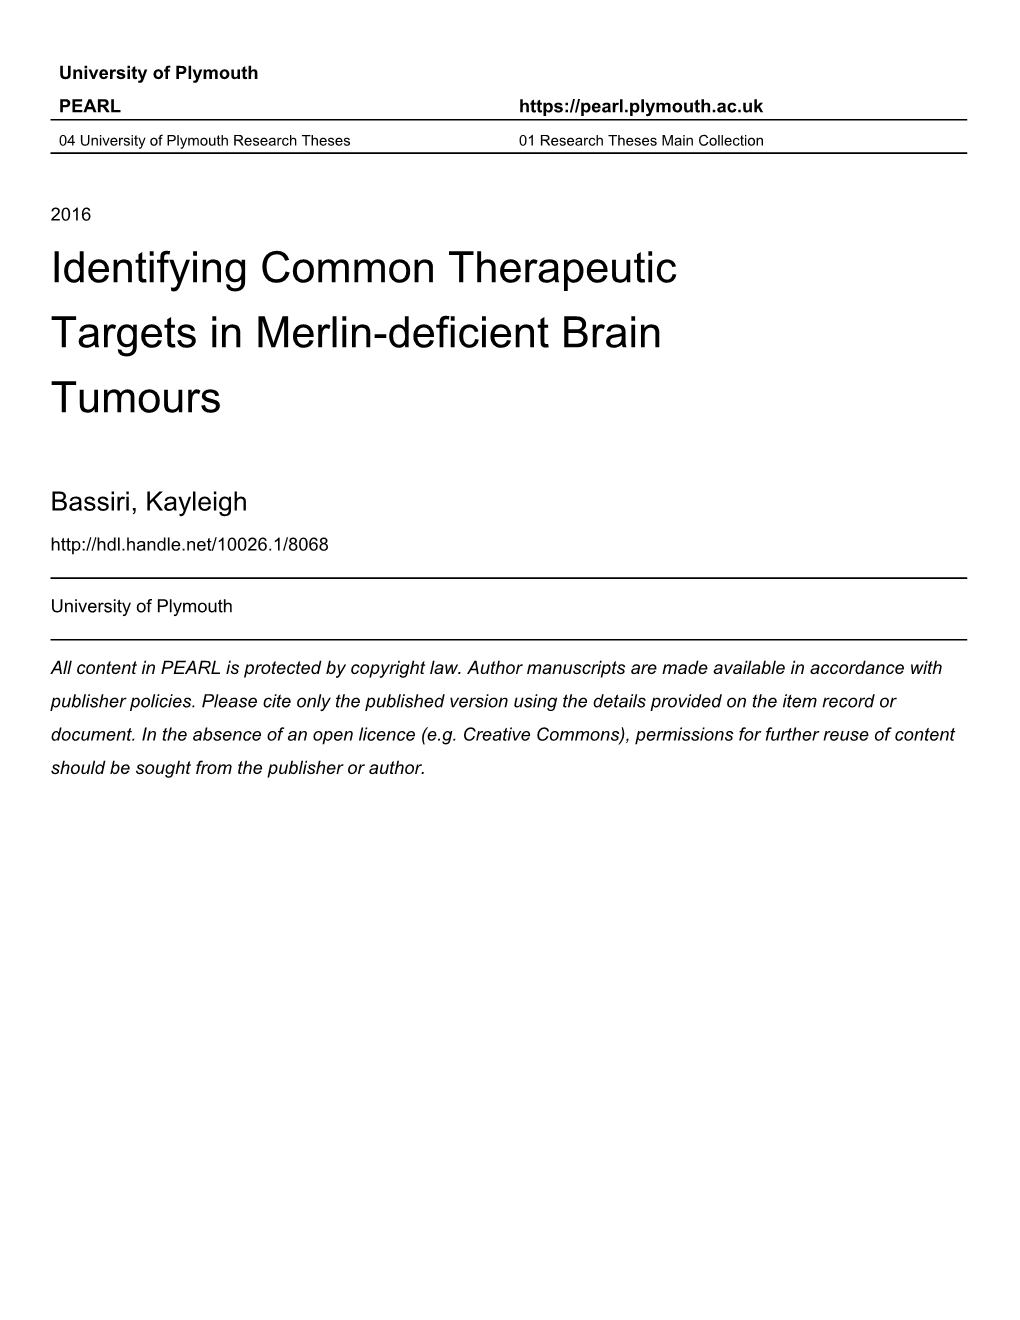 Identifying Common Therapeutic Targets in Merlin- Deficient Brain Tumours